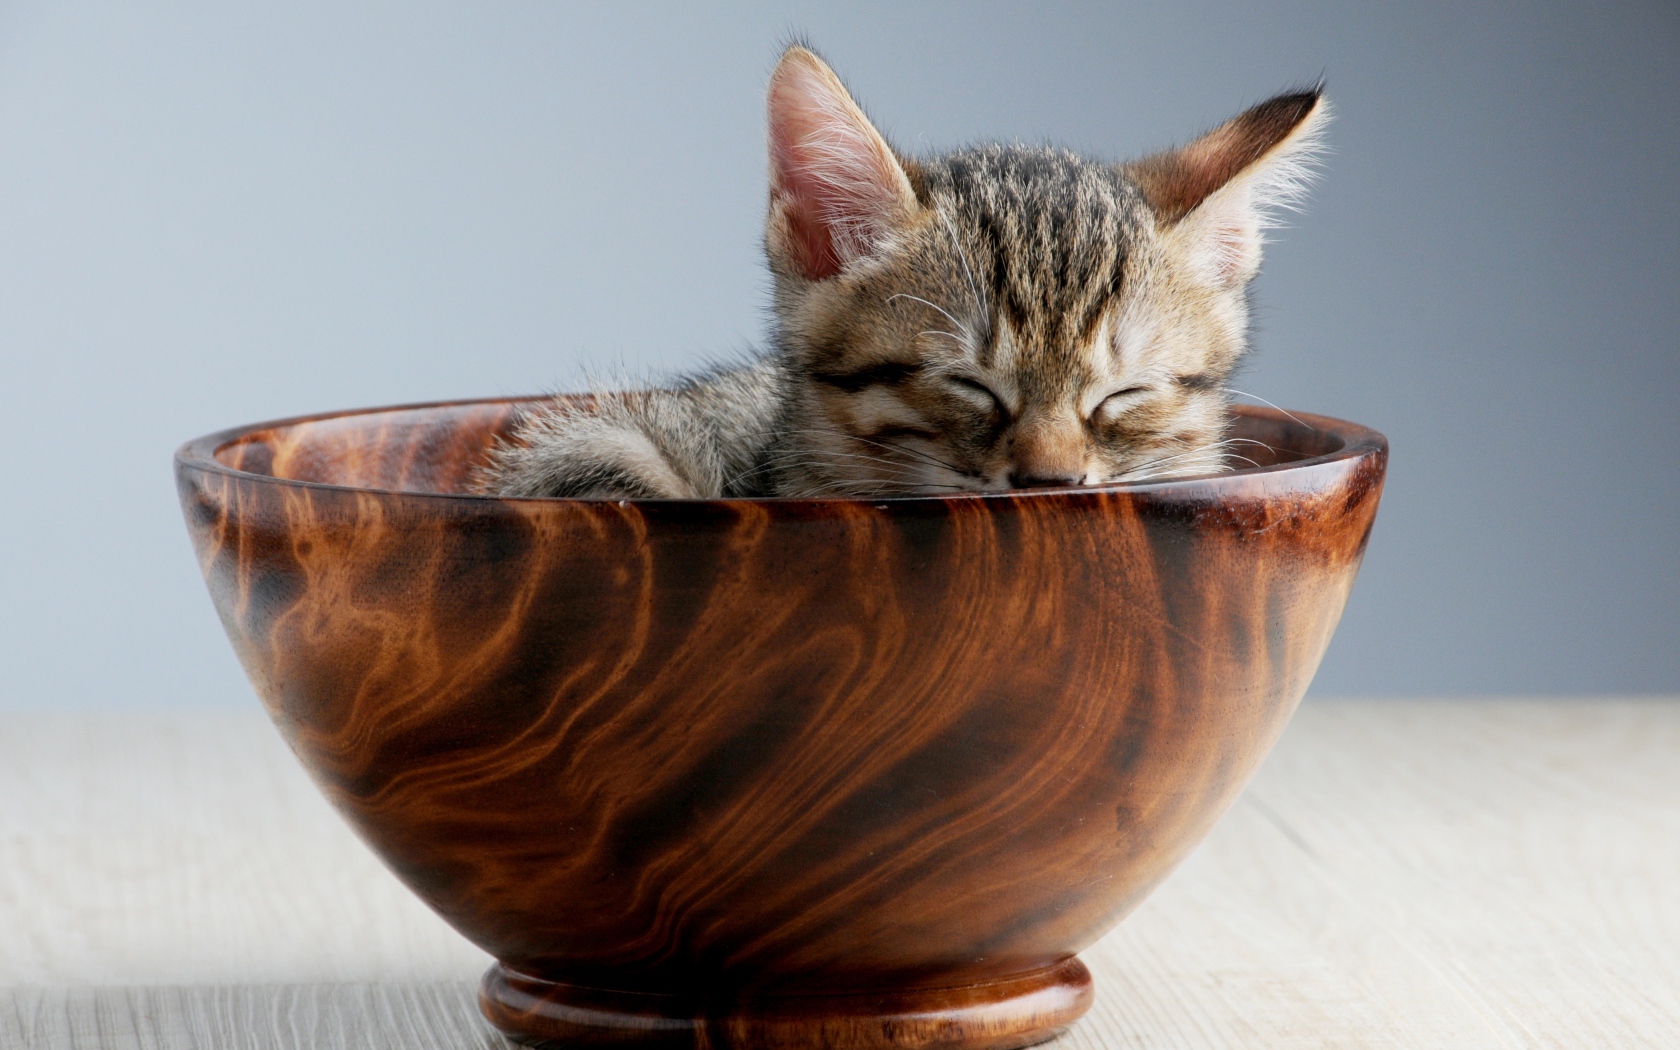 A small gray kitten sleeps in a brown plate